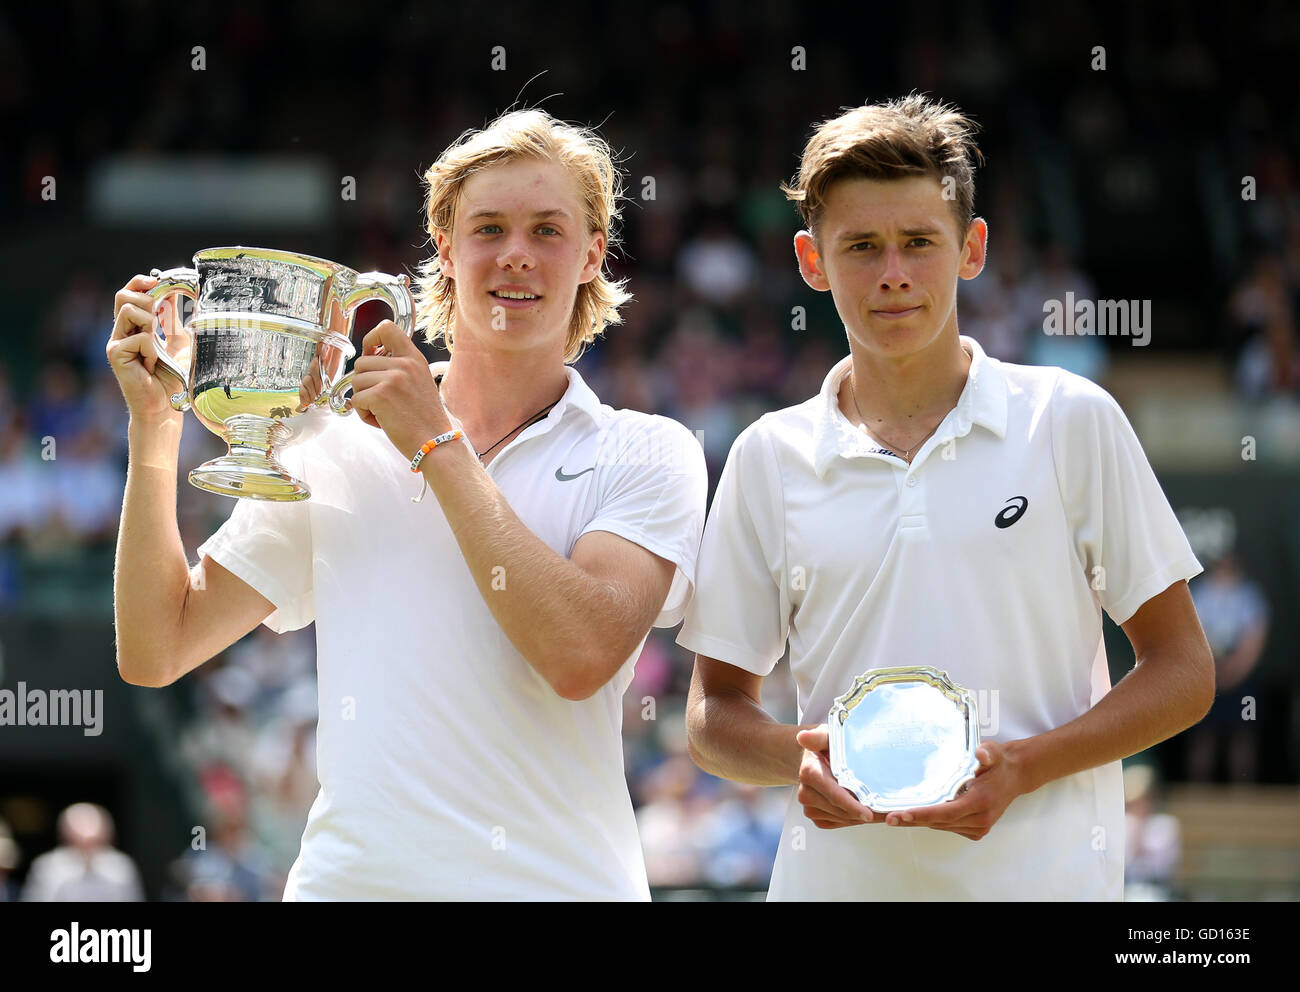 denis-shapovalov-right-poses-with-his-trophy-after-winning-the-boys-GD163E.jpg